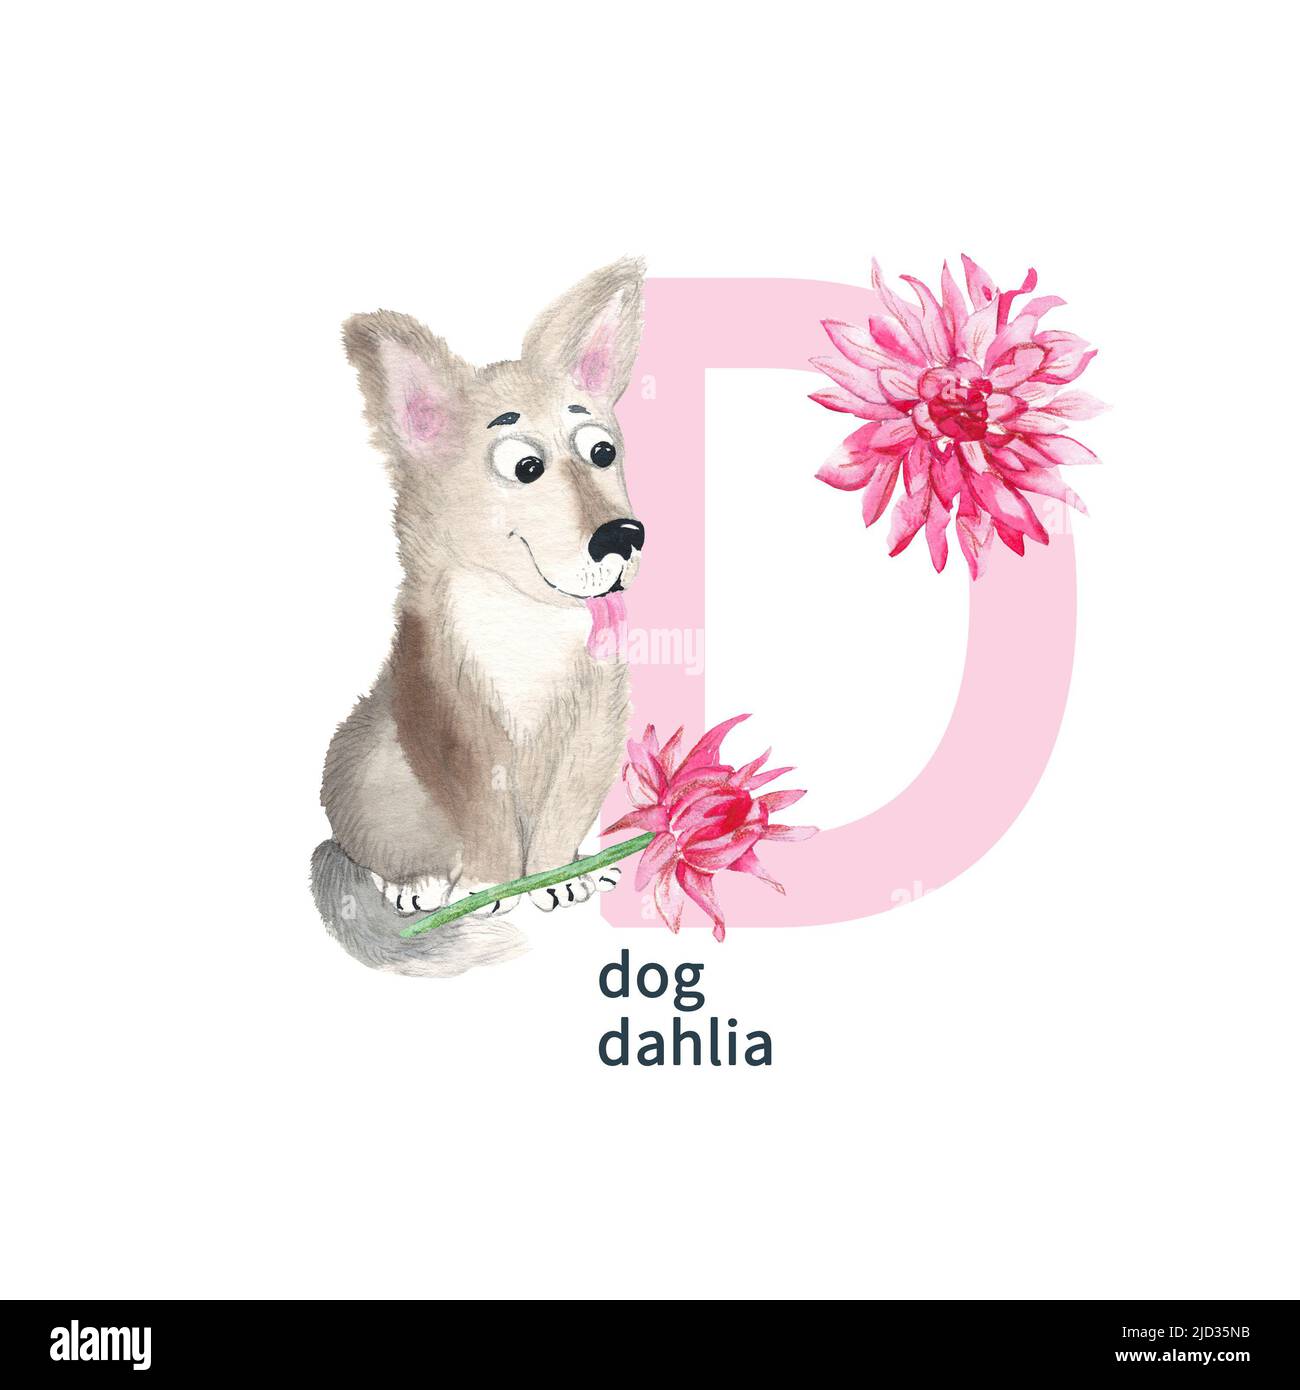 Letter D, dog, dahlia, cute kids colorful animals and flowers ABC alphabet. Watercolor illustration isolated on white background. Stock Photo